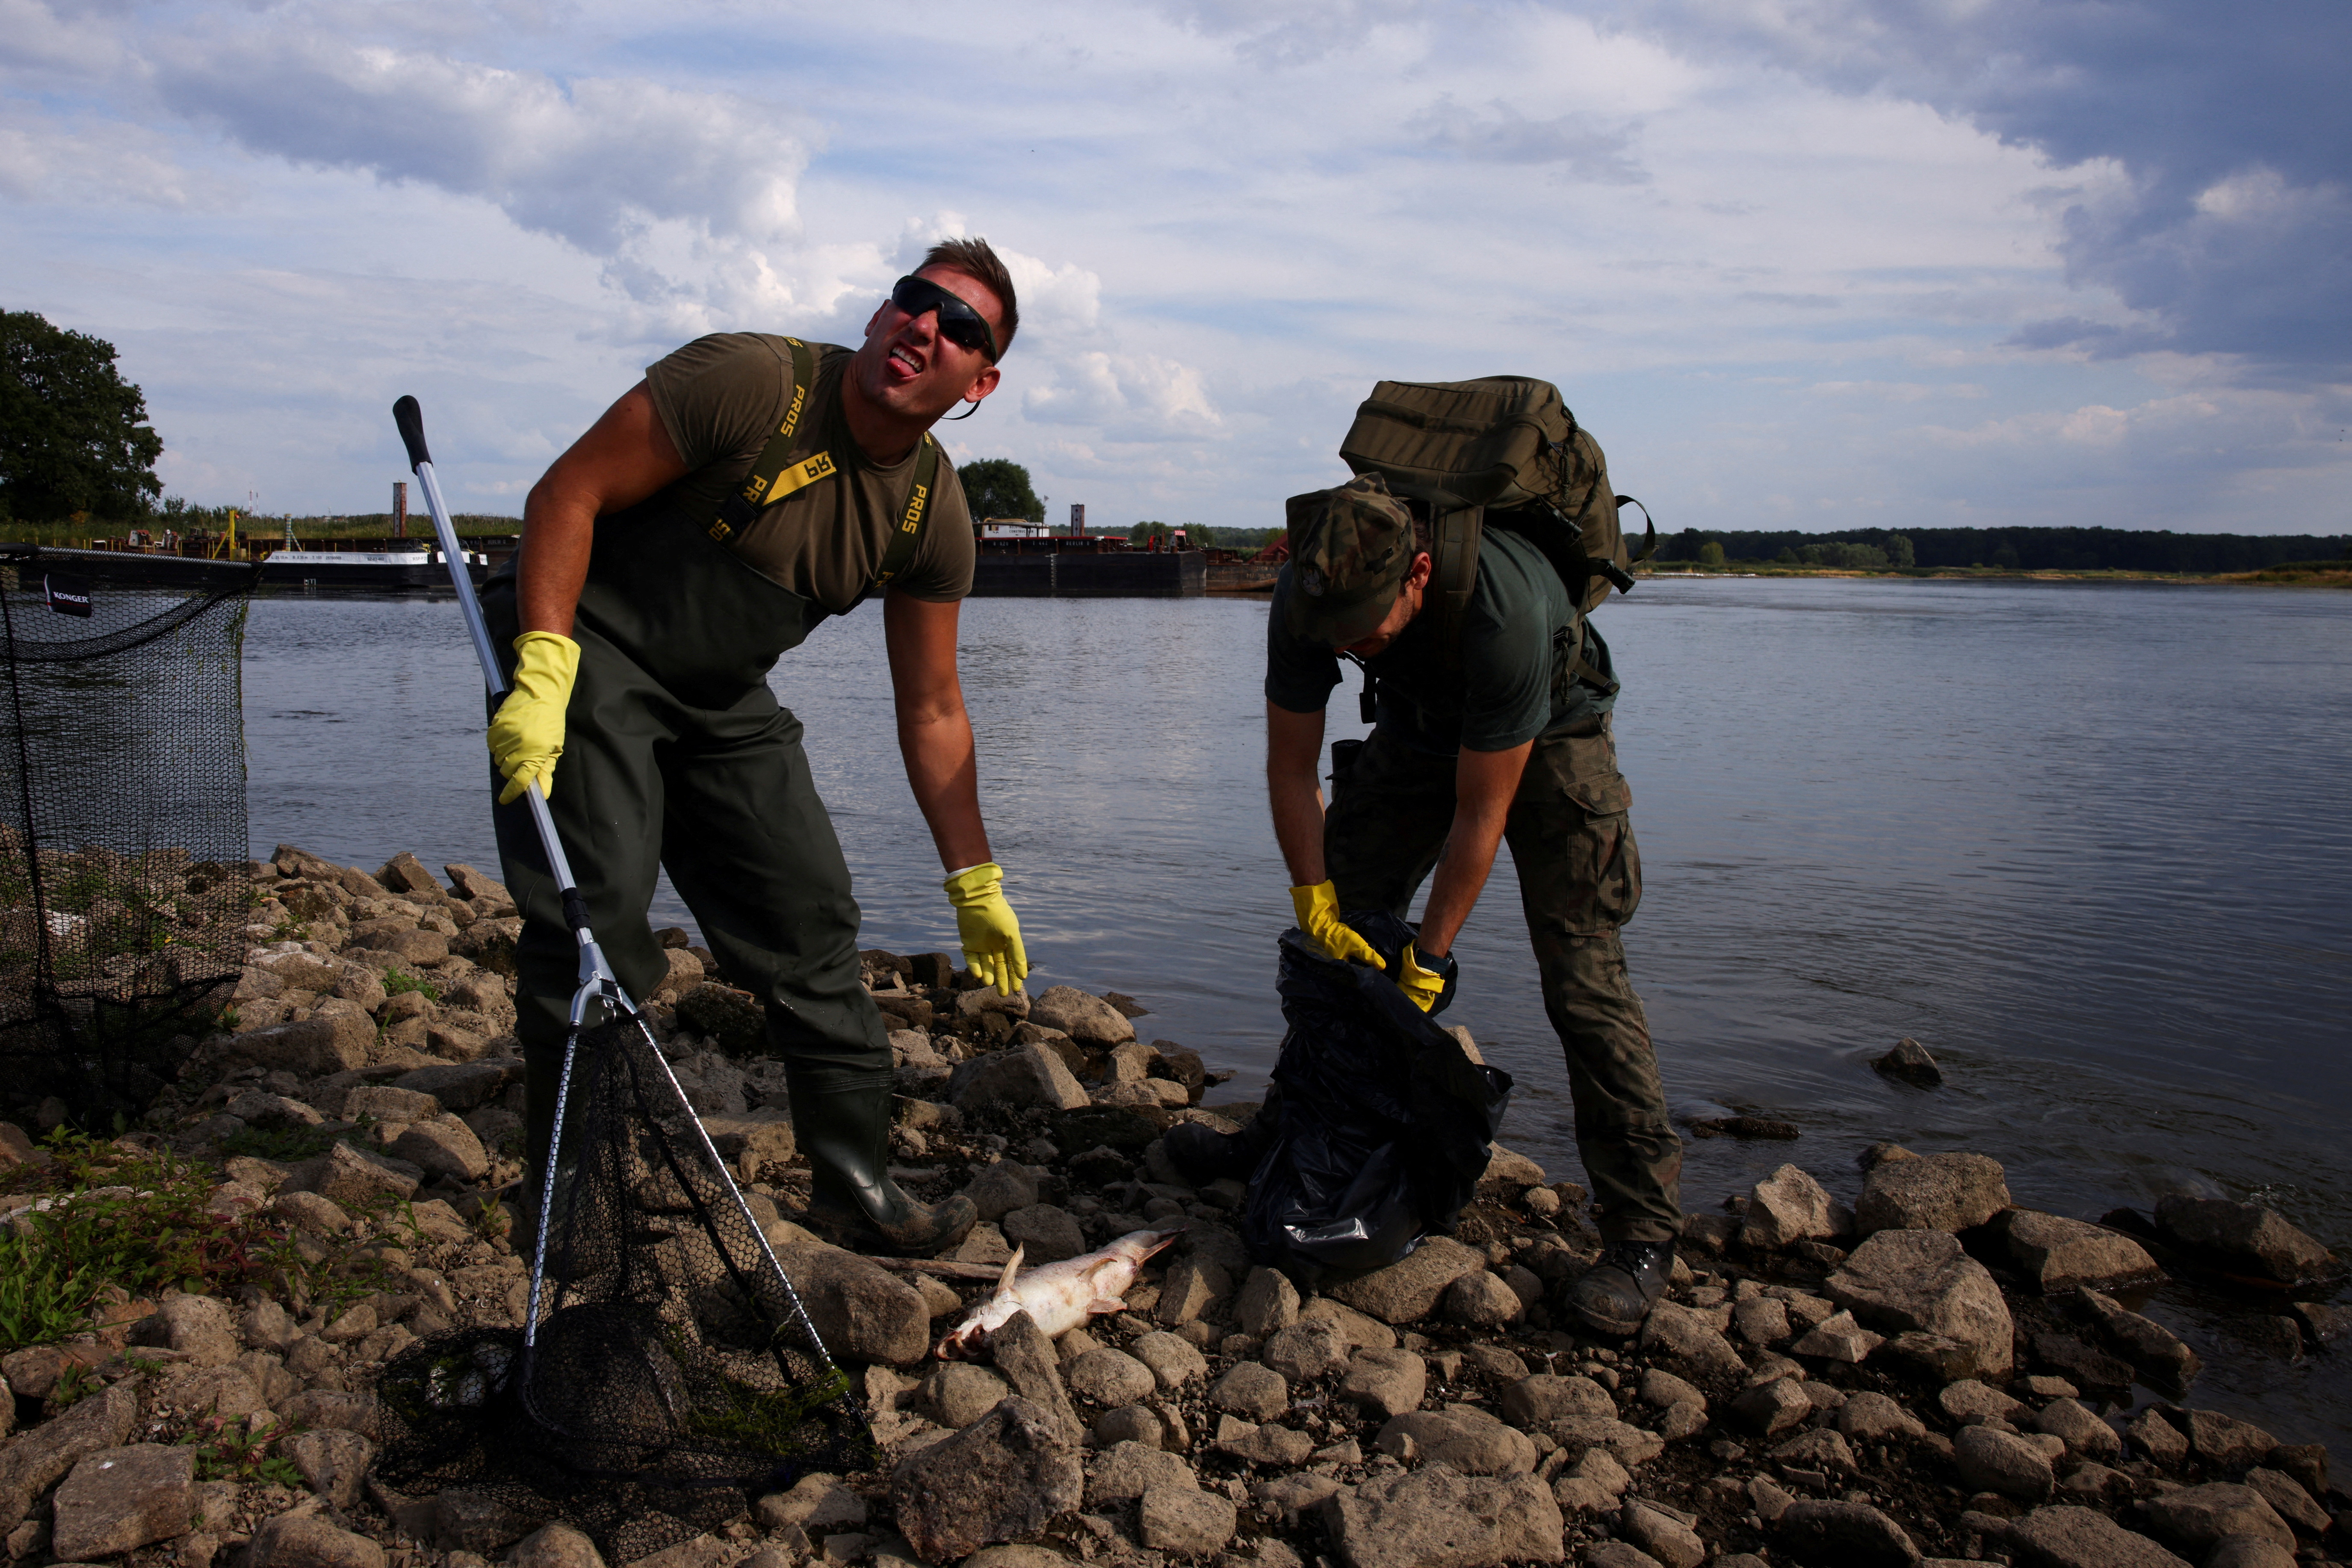 Members of the Polish Armed Forces remove dead fish from Oder river, in Slubice